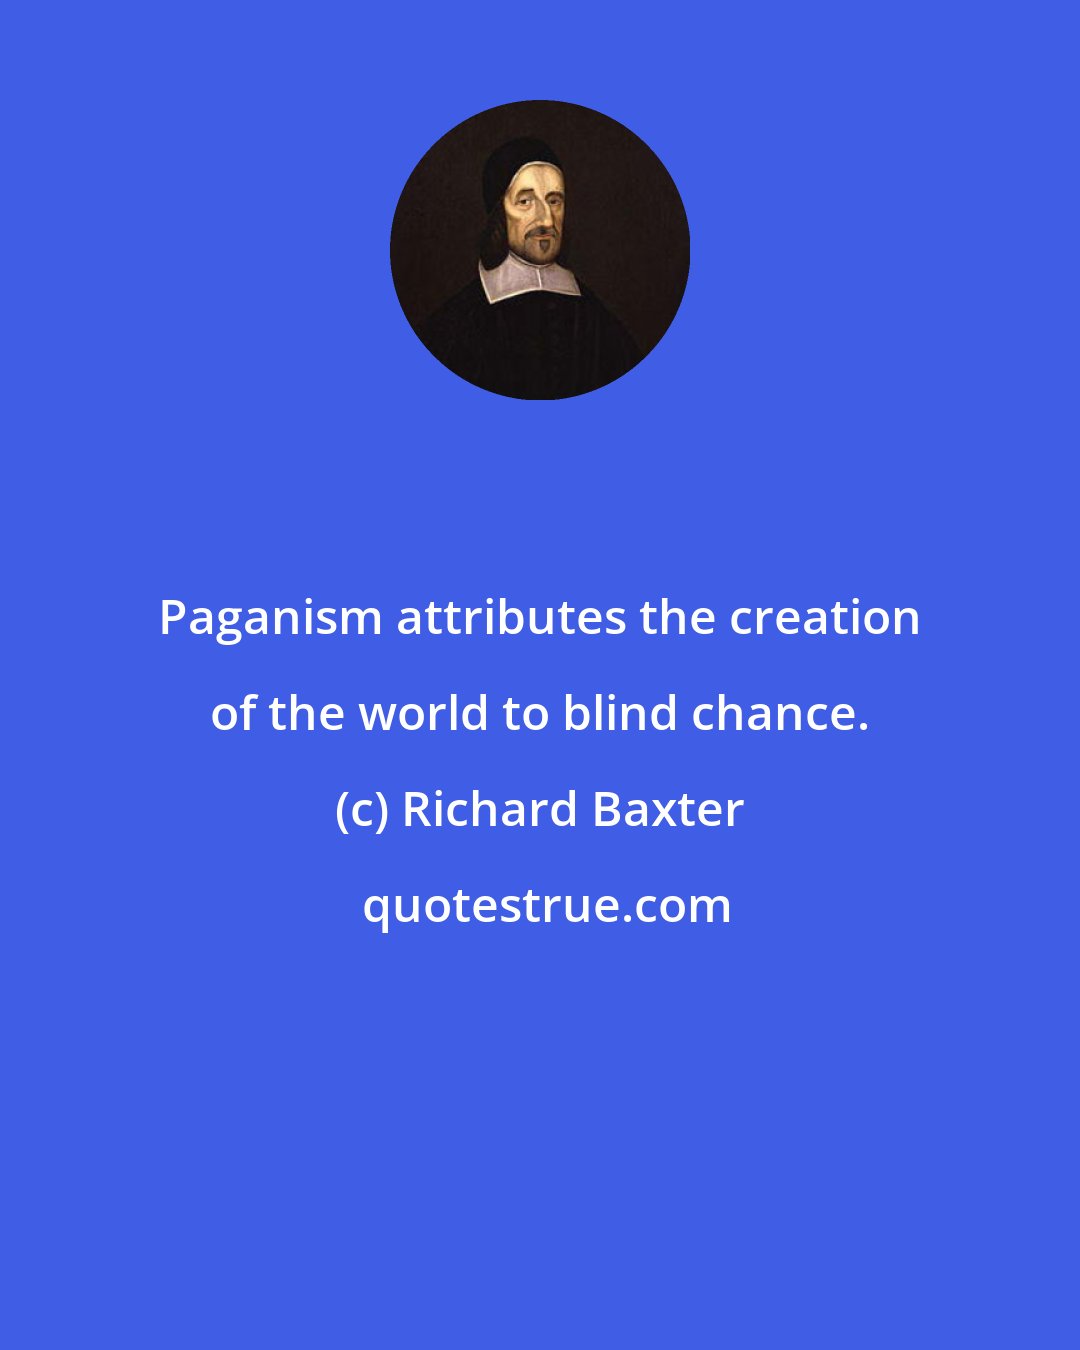 Richard Baxter: Paganism attributes the creation of the world to blind chance.